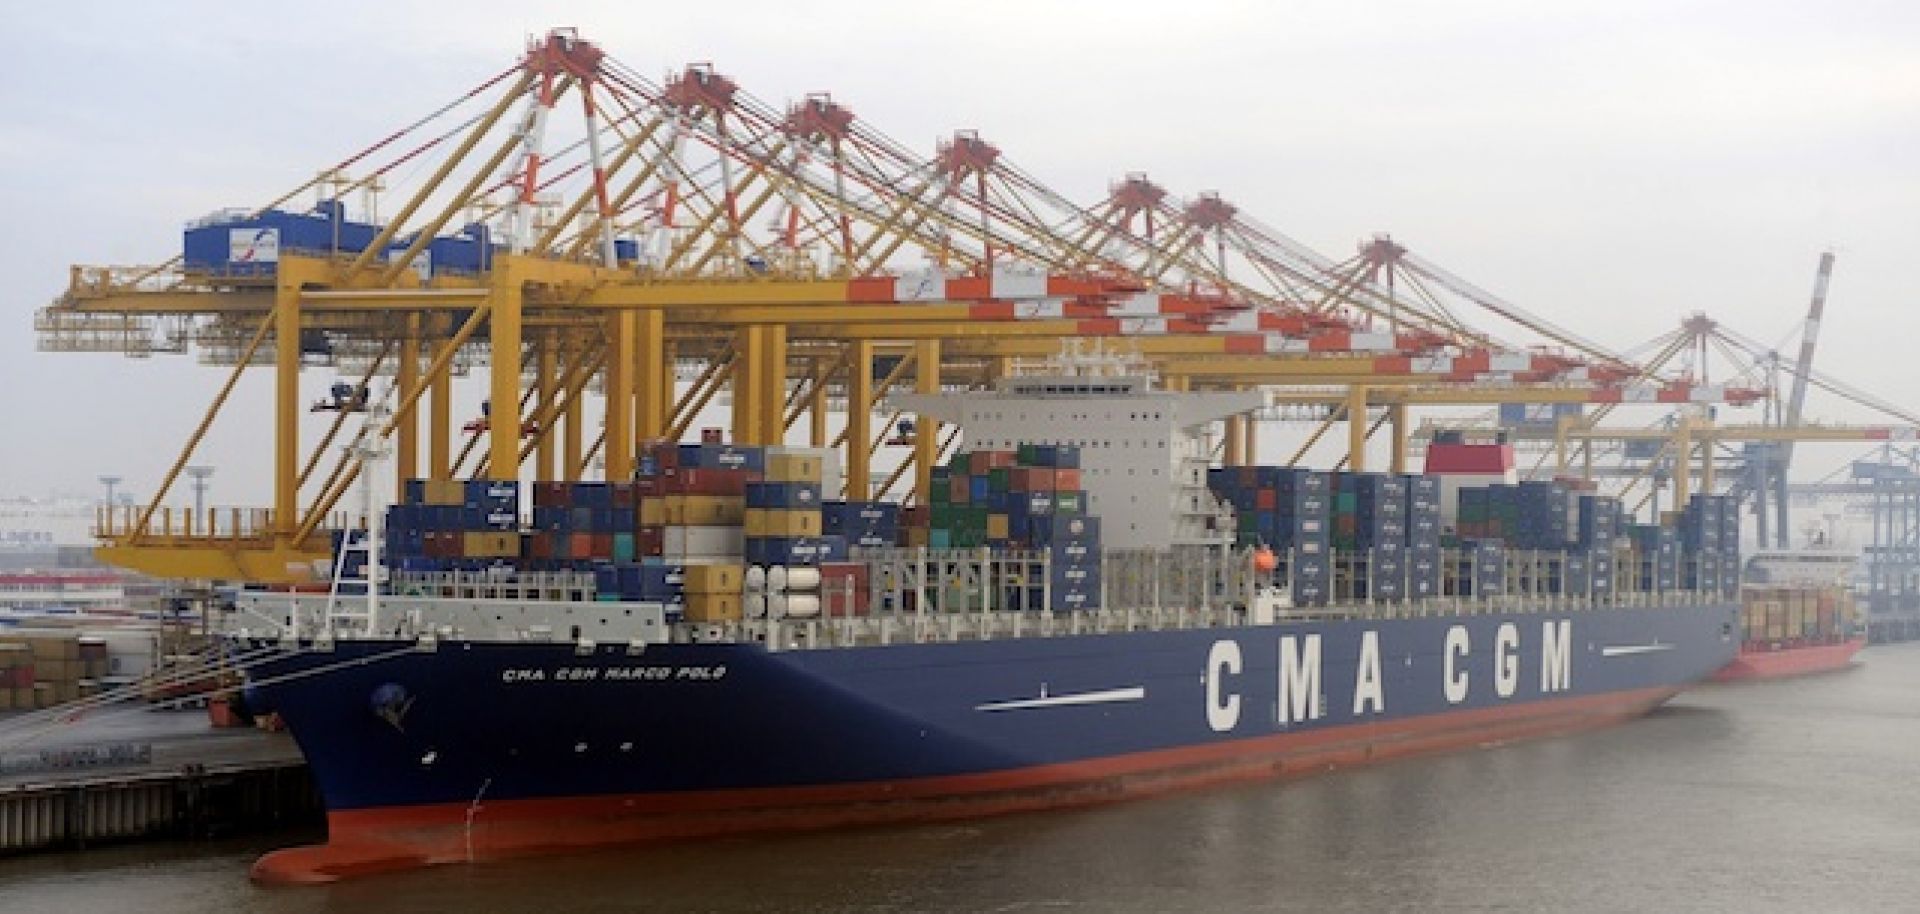 Global Shipping Contends with Oversupply Problems